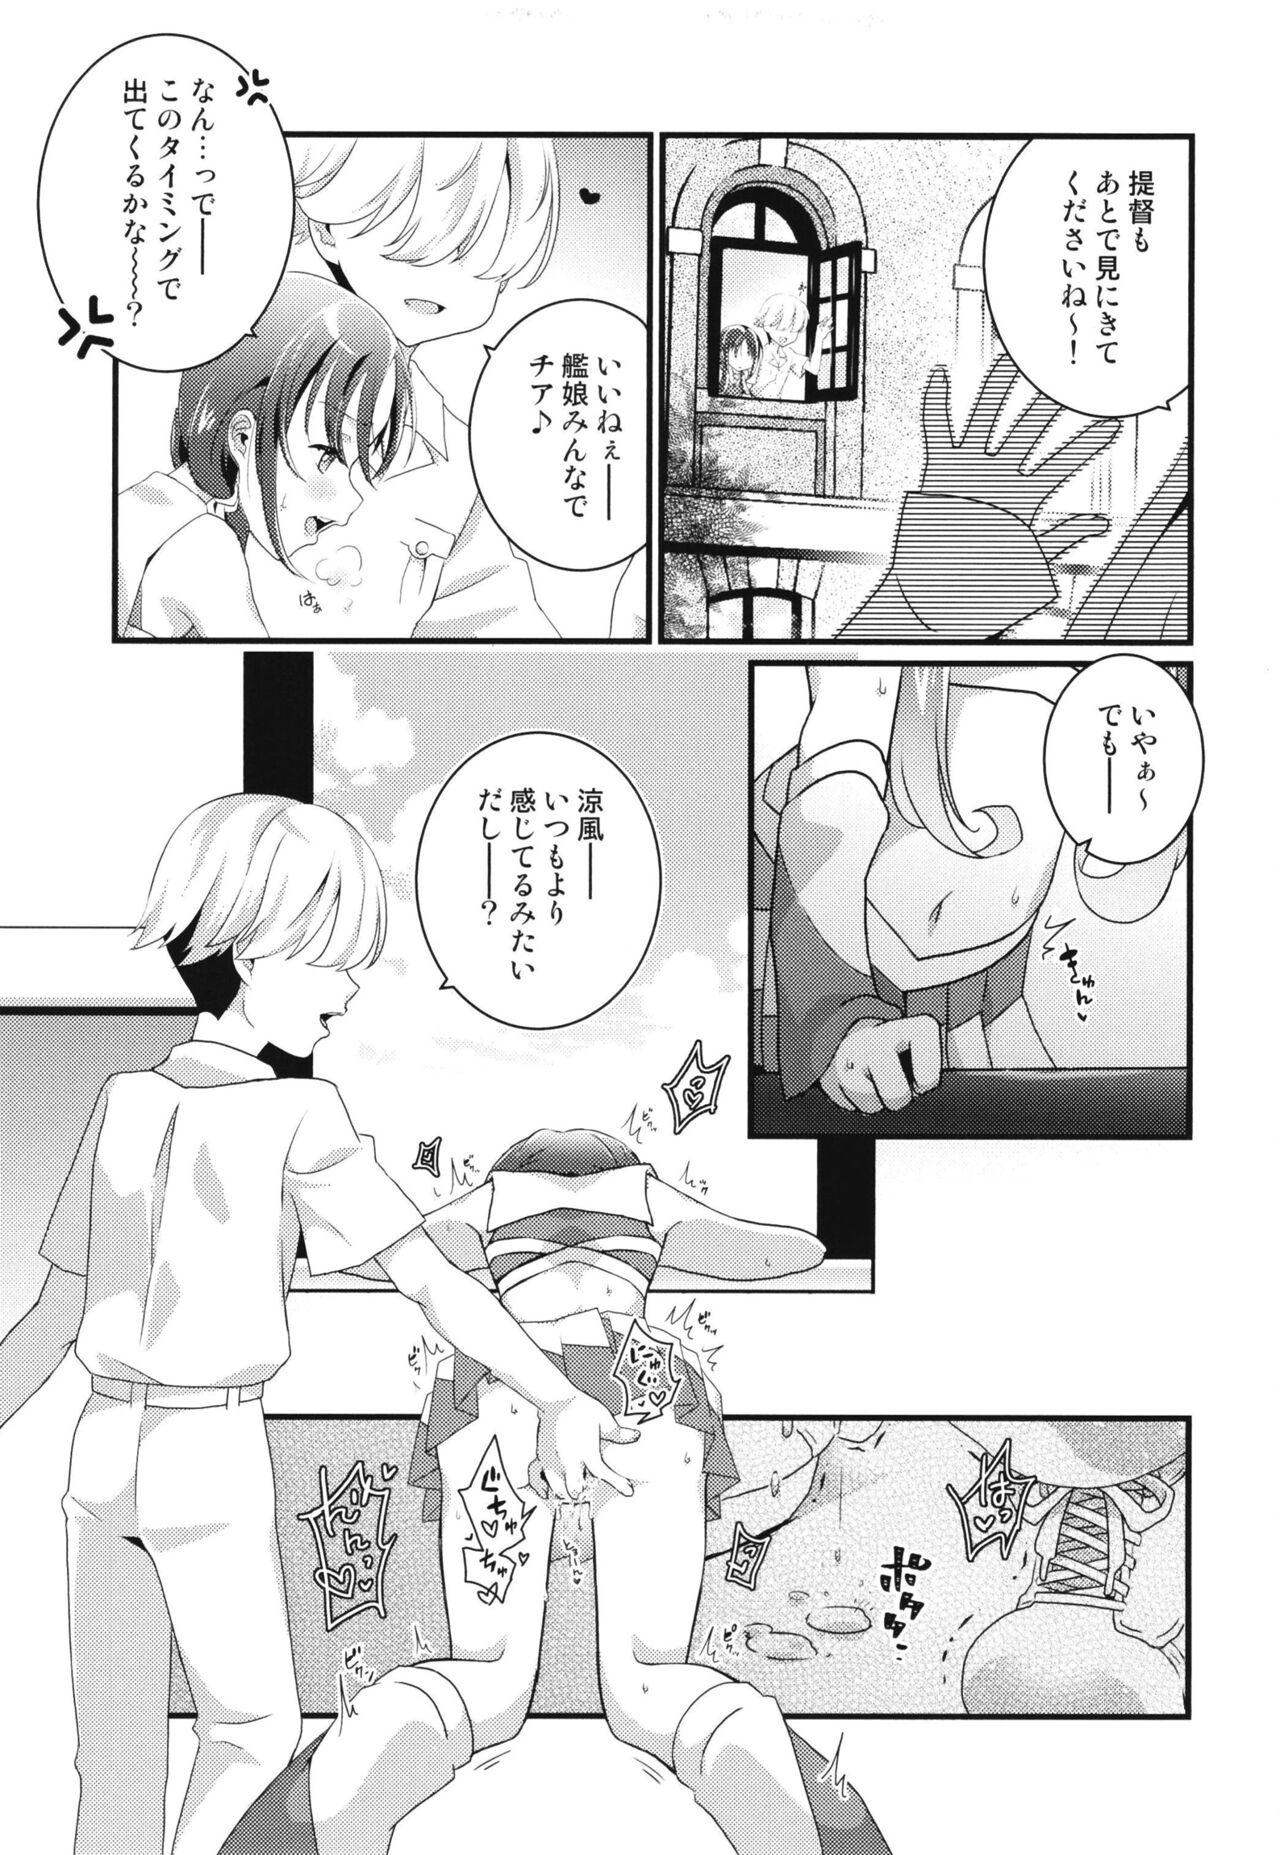 Hot Brunette Yah! Cheer! yeah! - Kantai collection Body Massage - Page 5